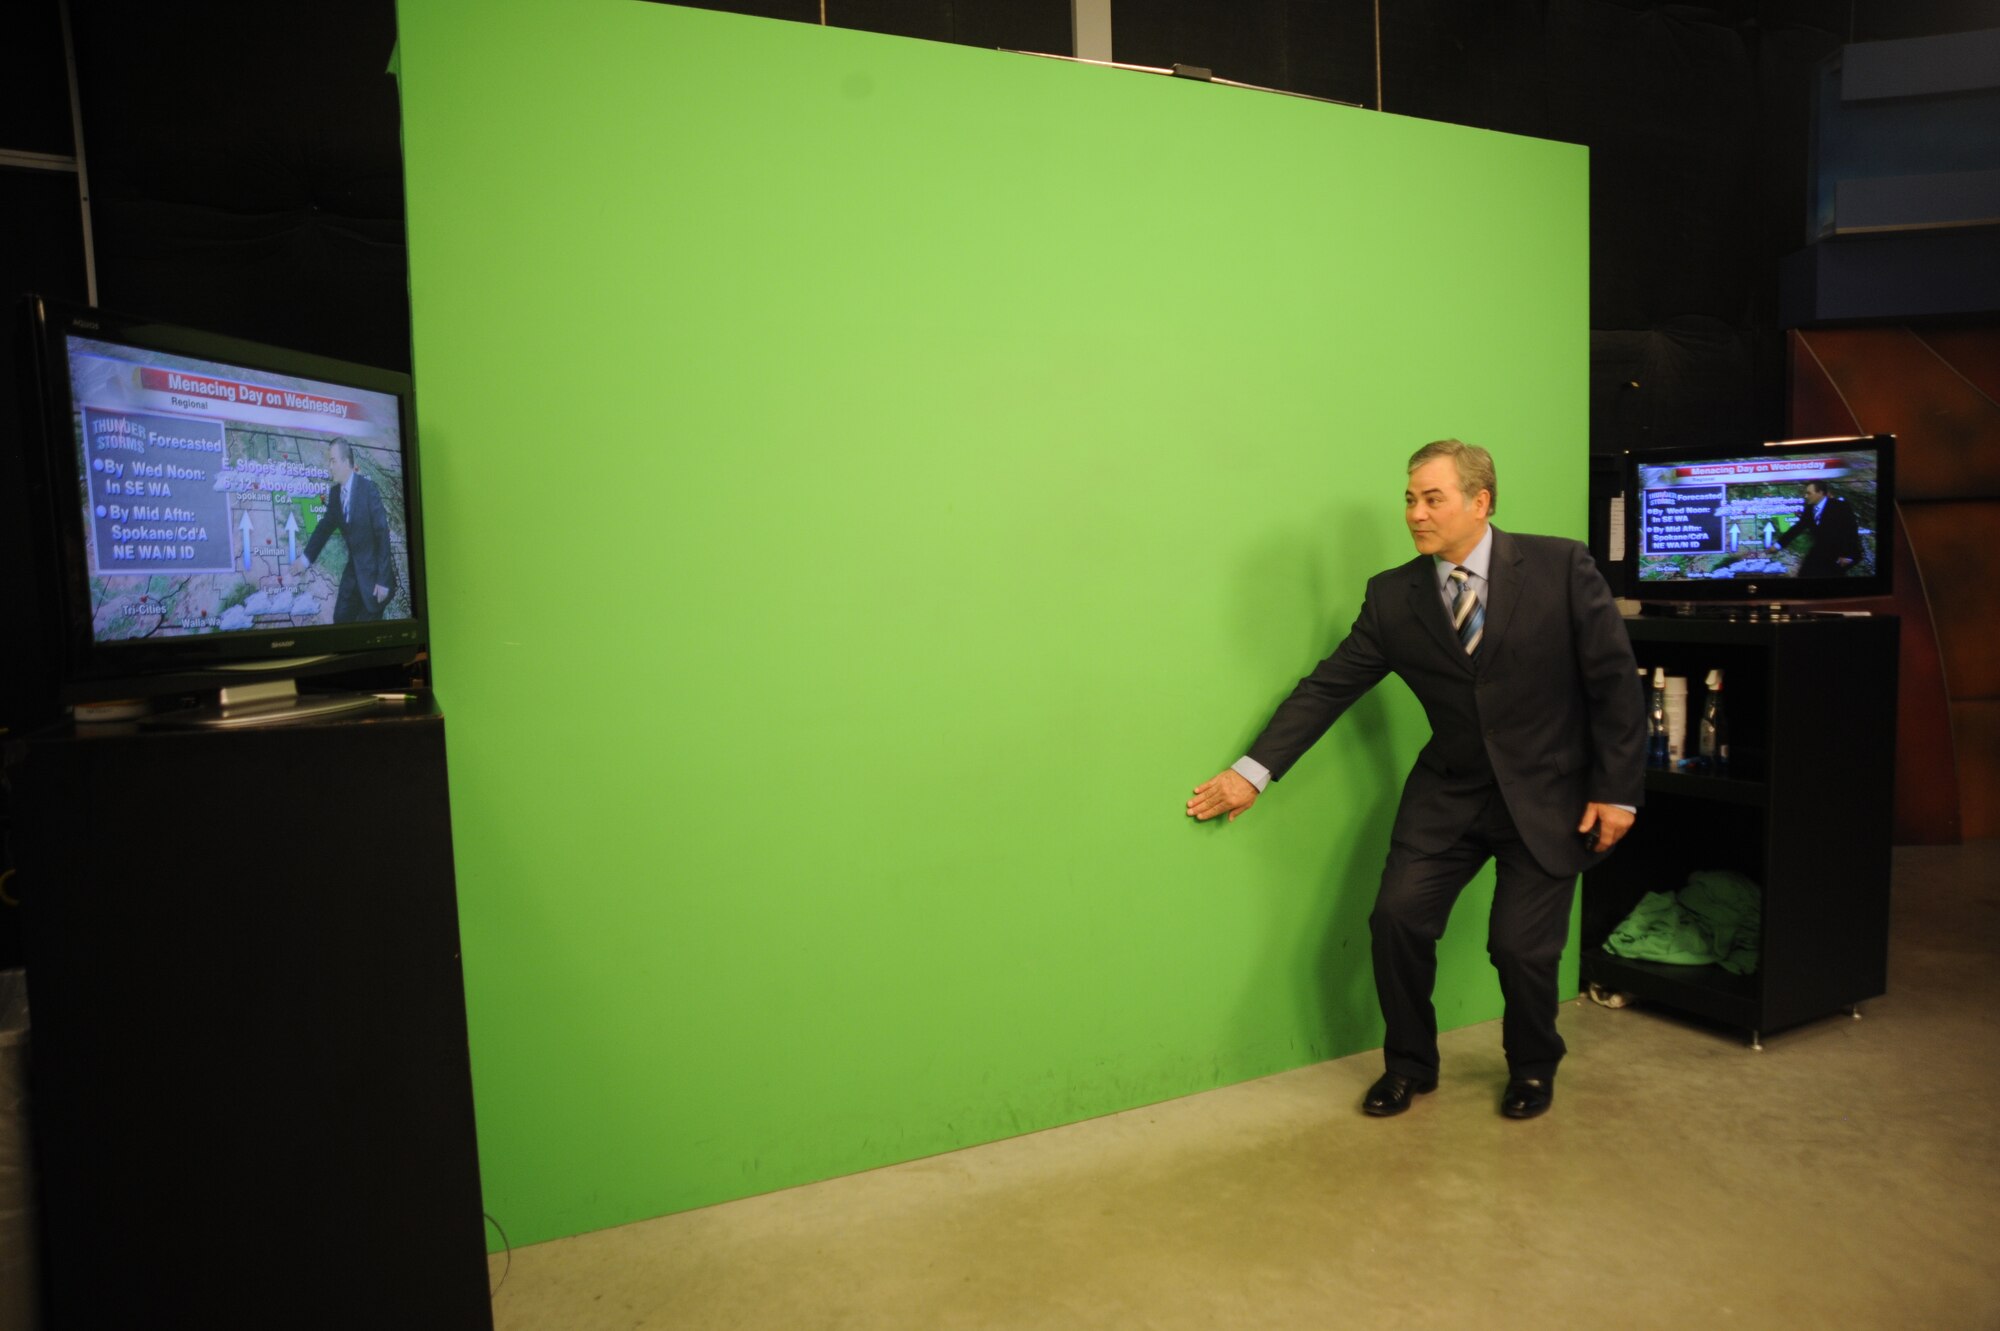 KHQ 6 News meteorologist Dave Law demonstrates how he does the weather in Spokane, Wash., April 12, 2012. He stands in front of a green screen with two monitors on each side to help him show viewers weather information. KHQ 6 anchors often use scripts to deliver news, meteorologists deliver the forecasts “off the cuff” without the use of a script. (U.S. Air Force photo by Airman 1st Class Earlandez Young/Released)